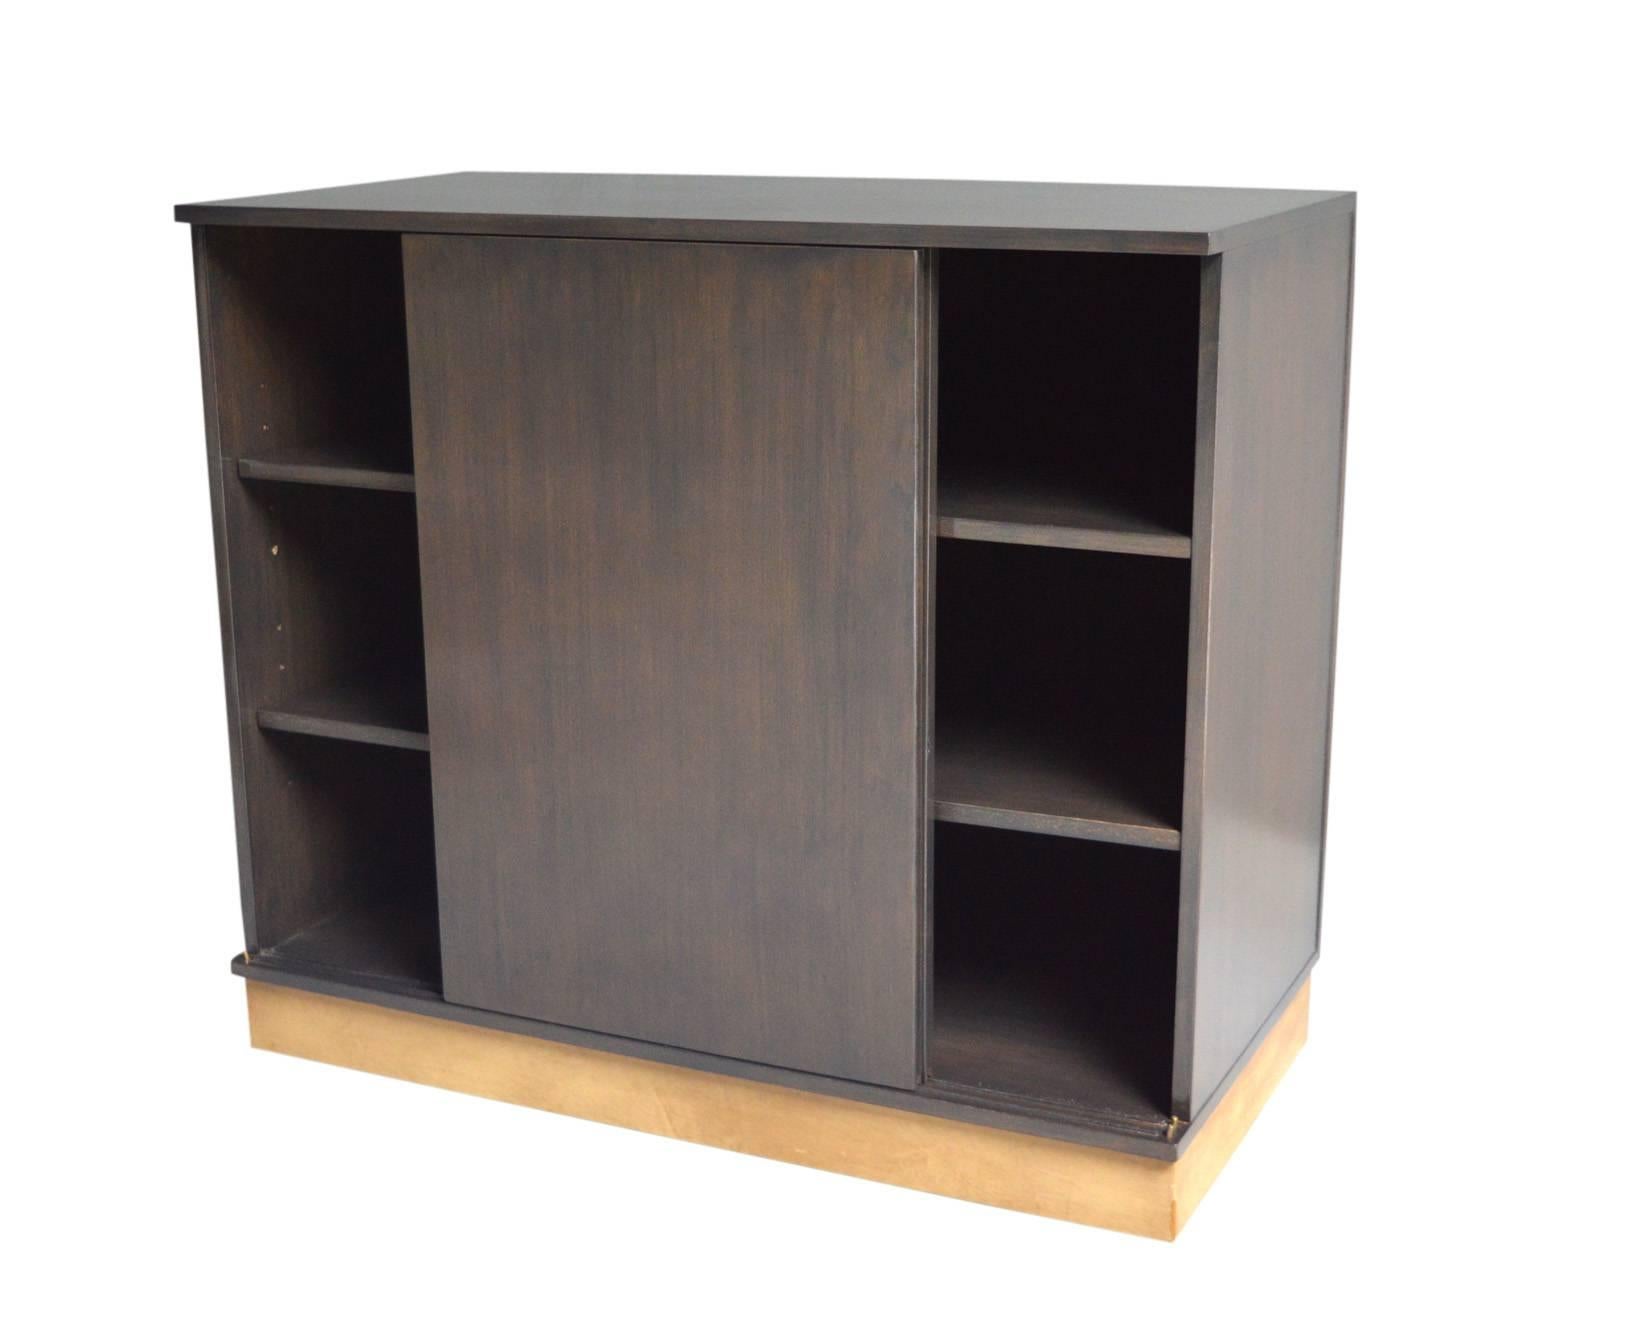 Handsome walnut cabinet by Edward Wormley for Dunbar. Three inner shelves with sliding doors. Bottom of cabinet is wrapped in tan leather. Dunbar tag on the back. Newly refinished in grey. Perfect size. Matching cabinet without doors also available